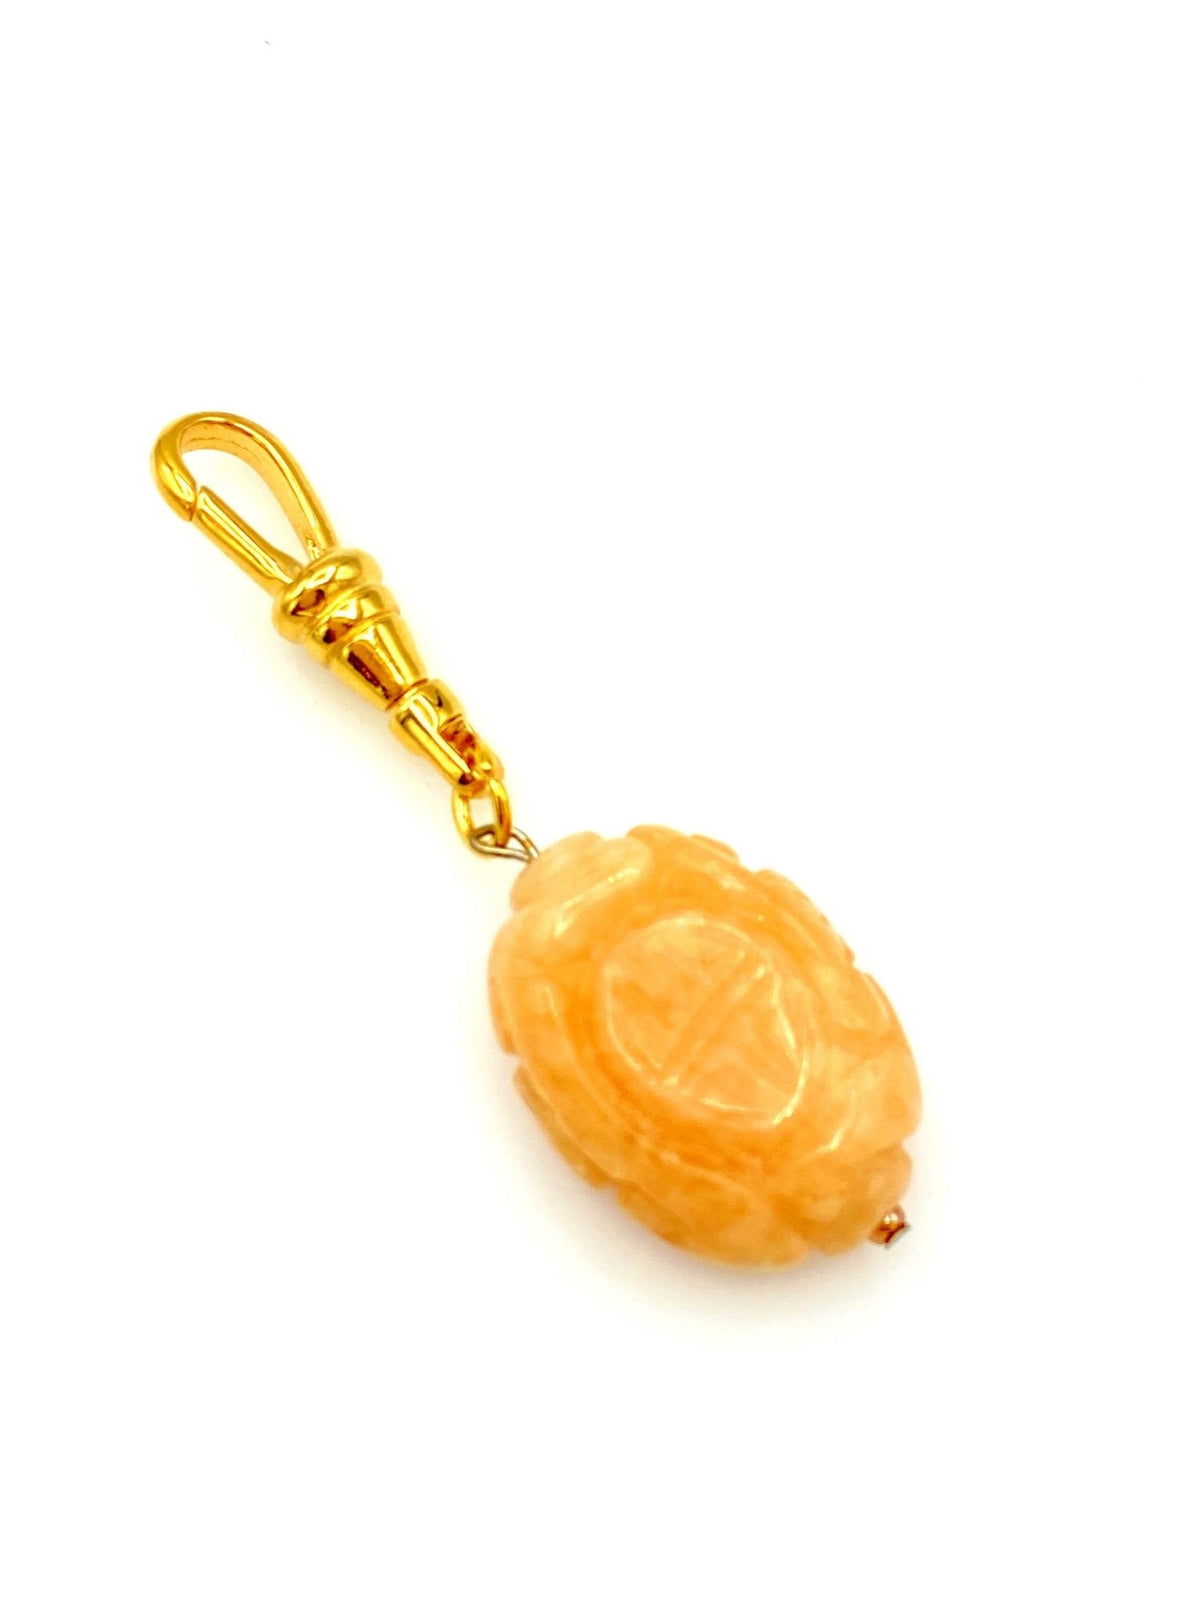 Peach Carved Stone Chinese Characters Charm - 24 Wishes Vintage Jewelry